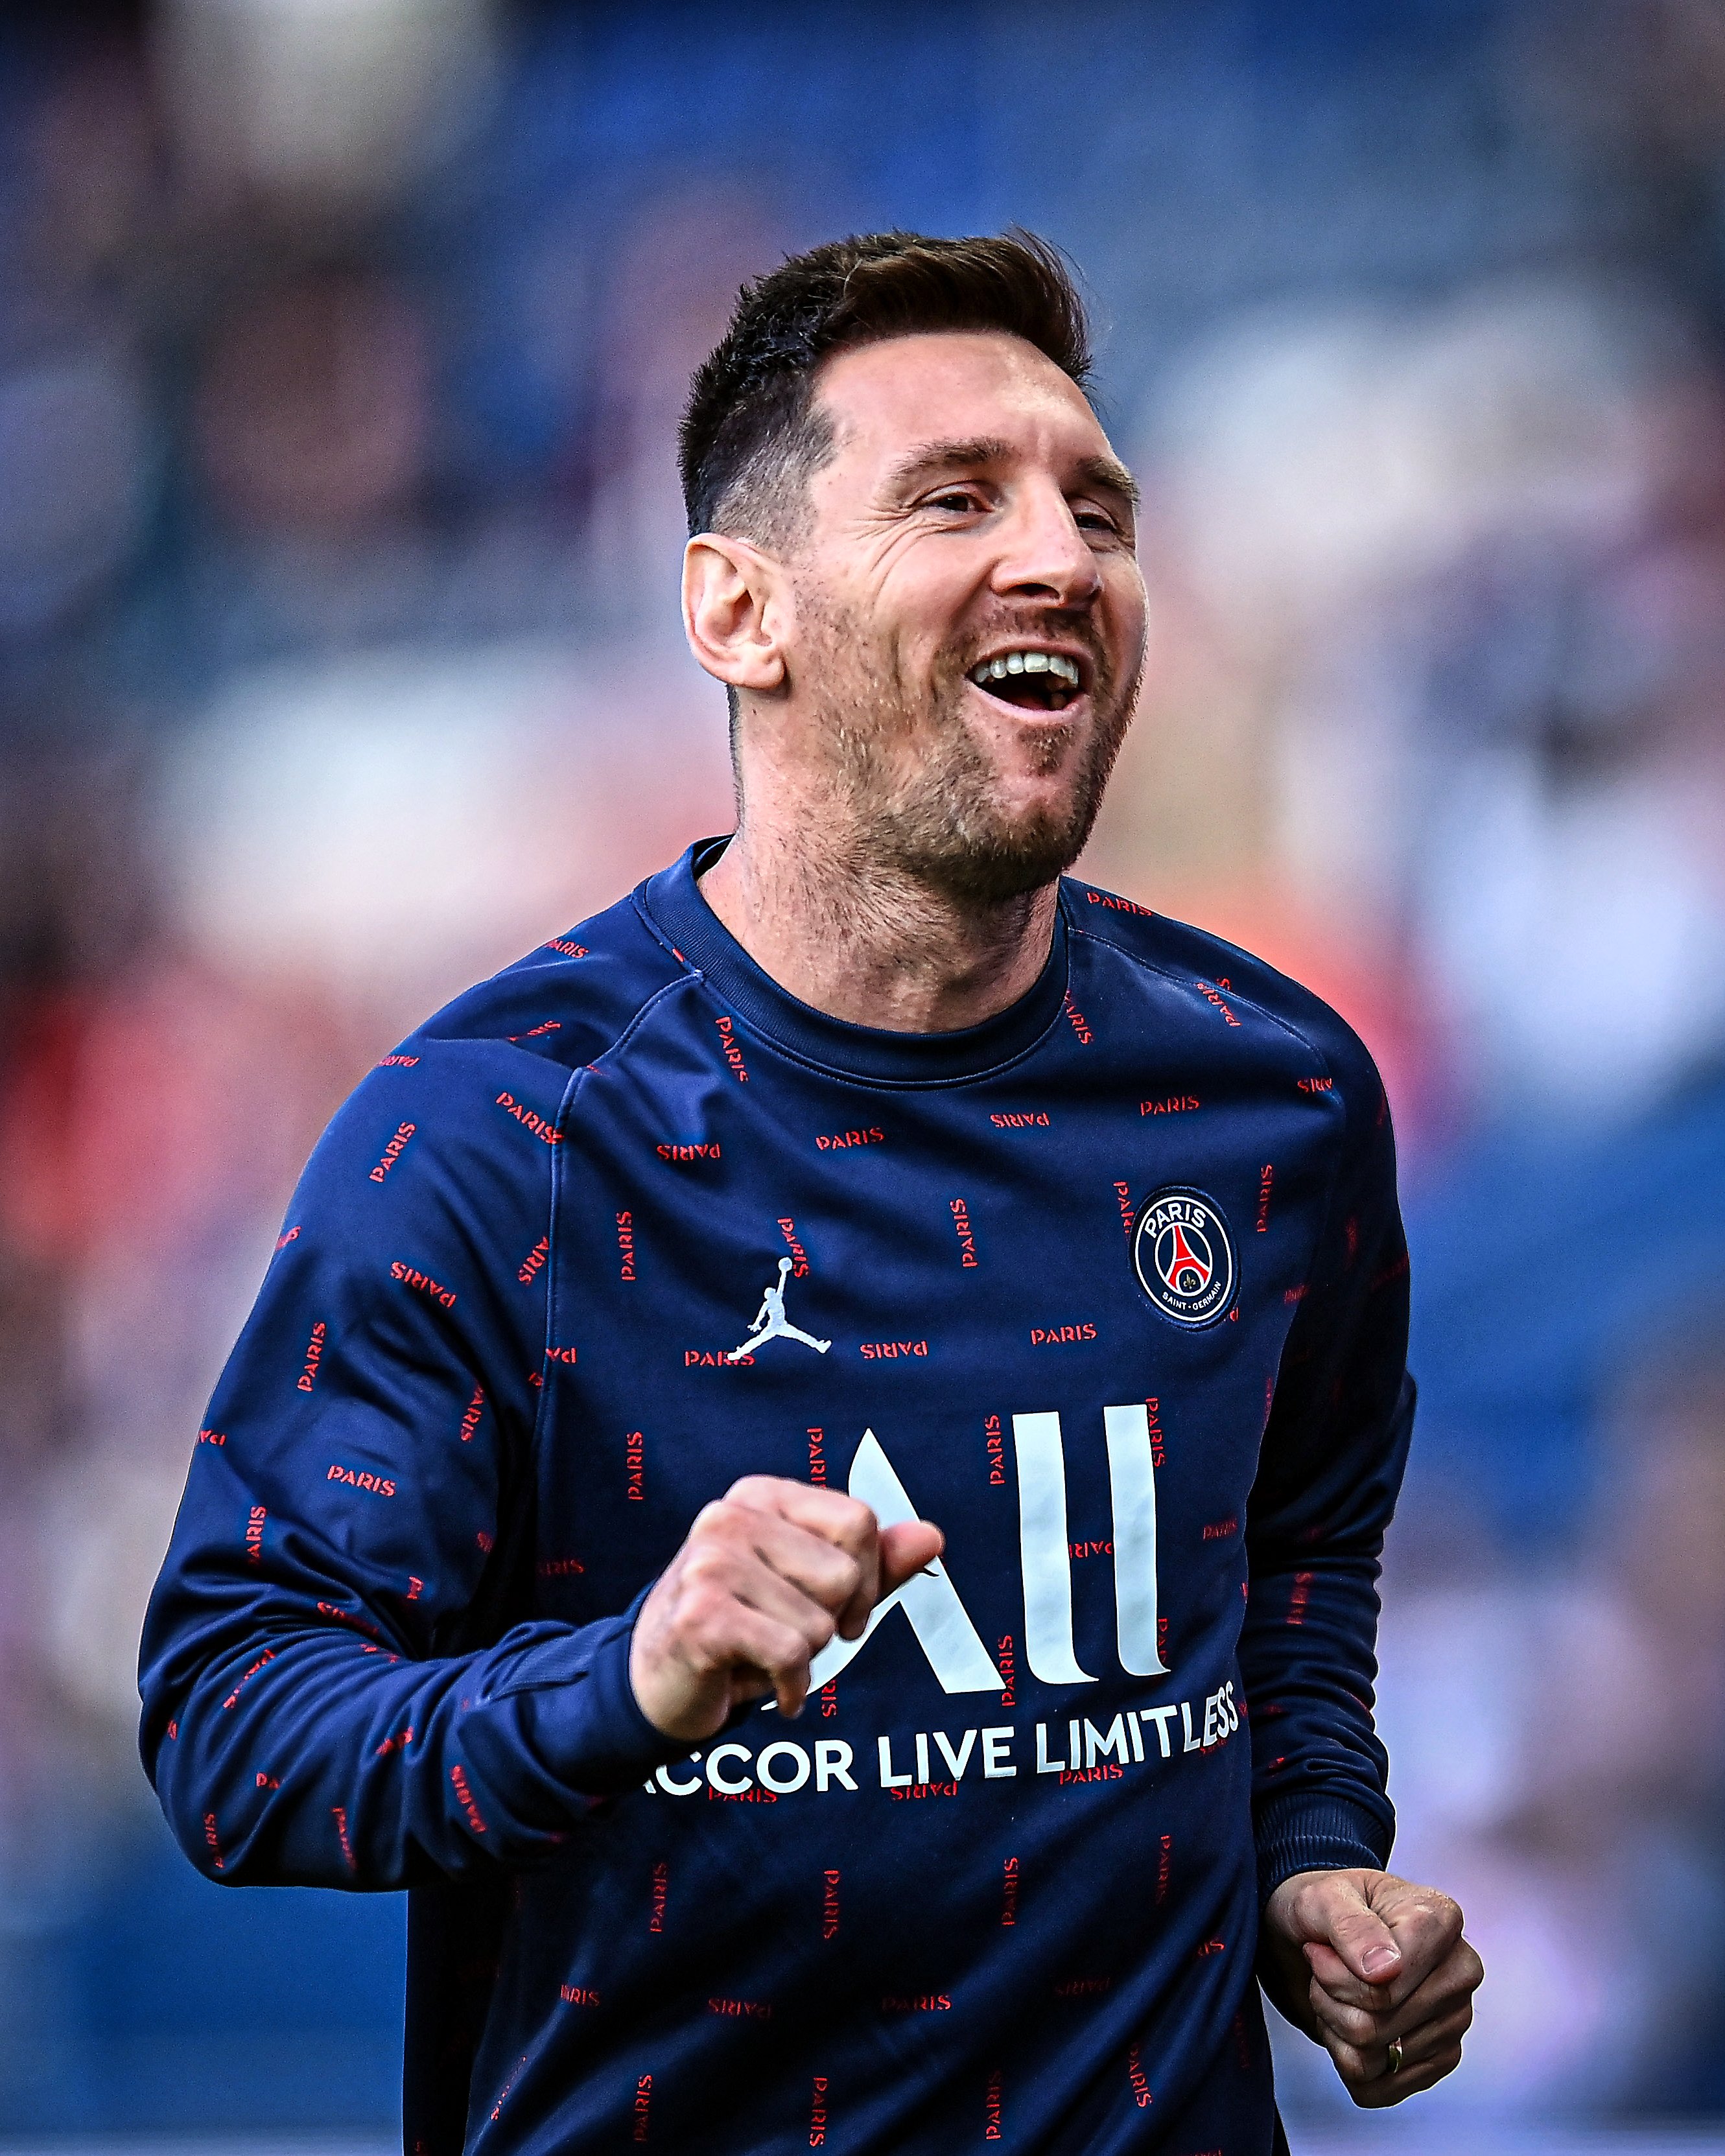 GOAL Messi will join MLS side Inter Miami in according to DIRECTV Sports